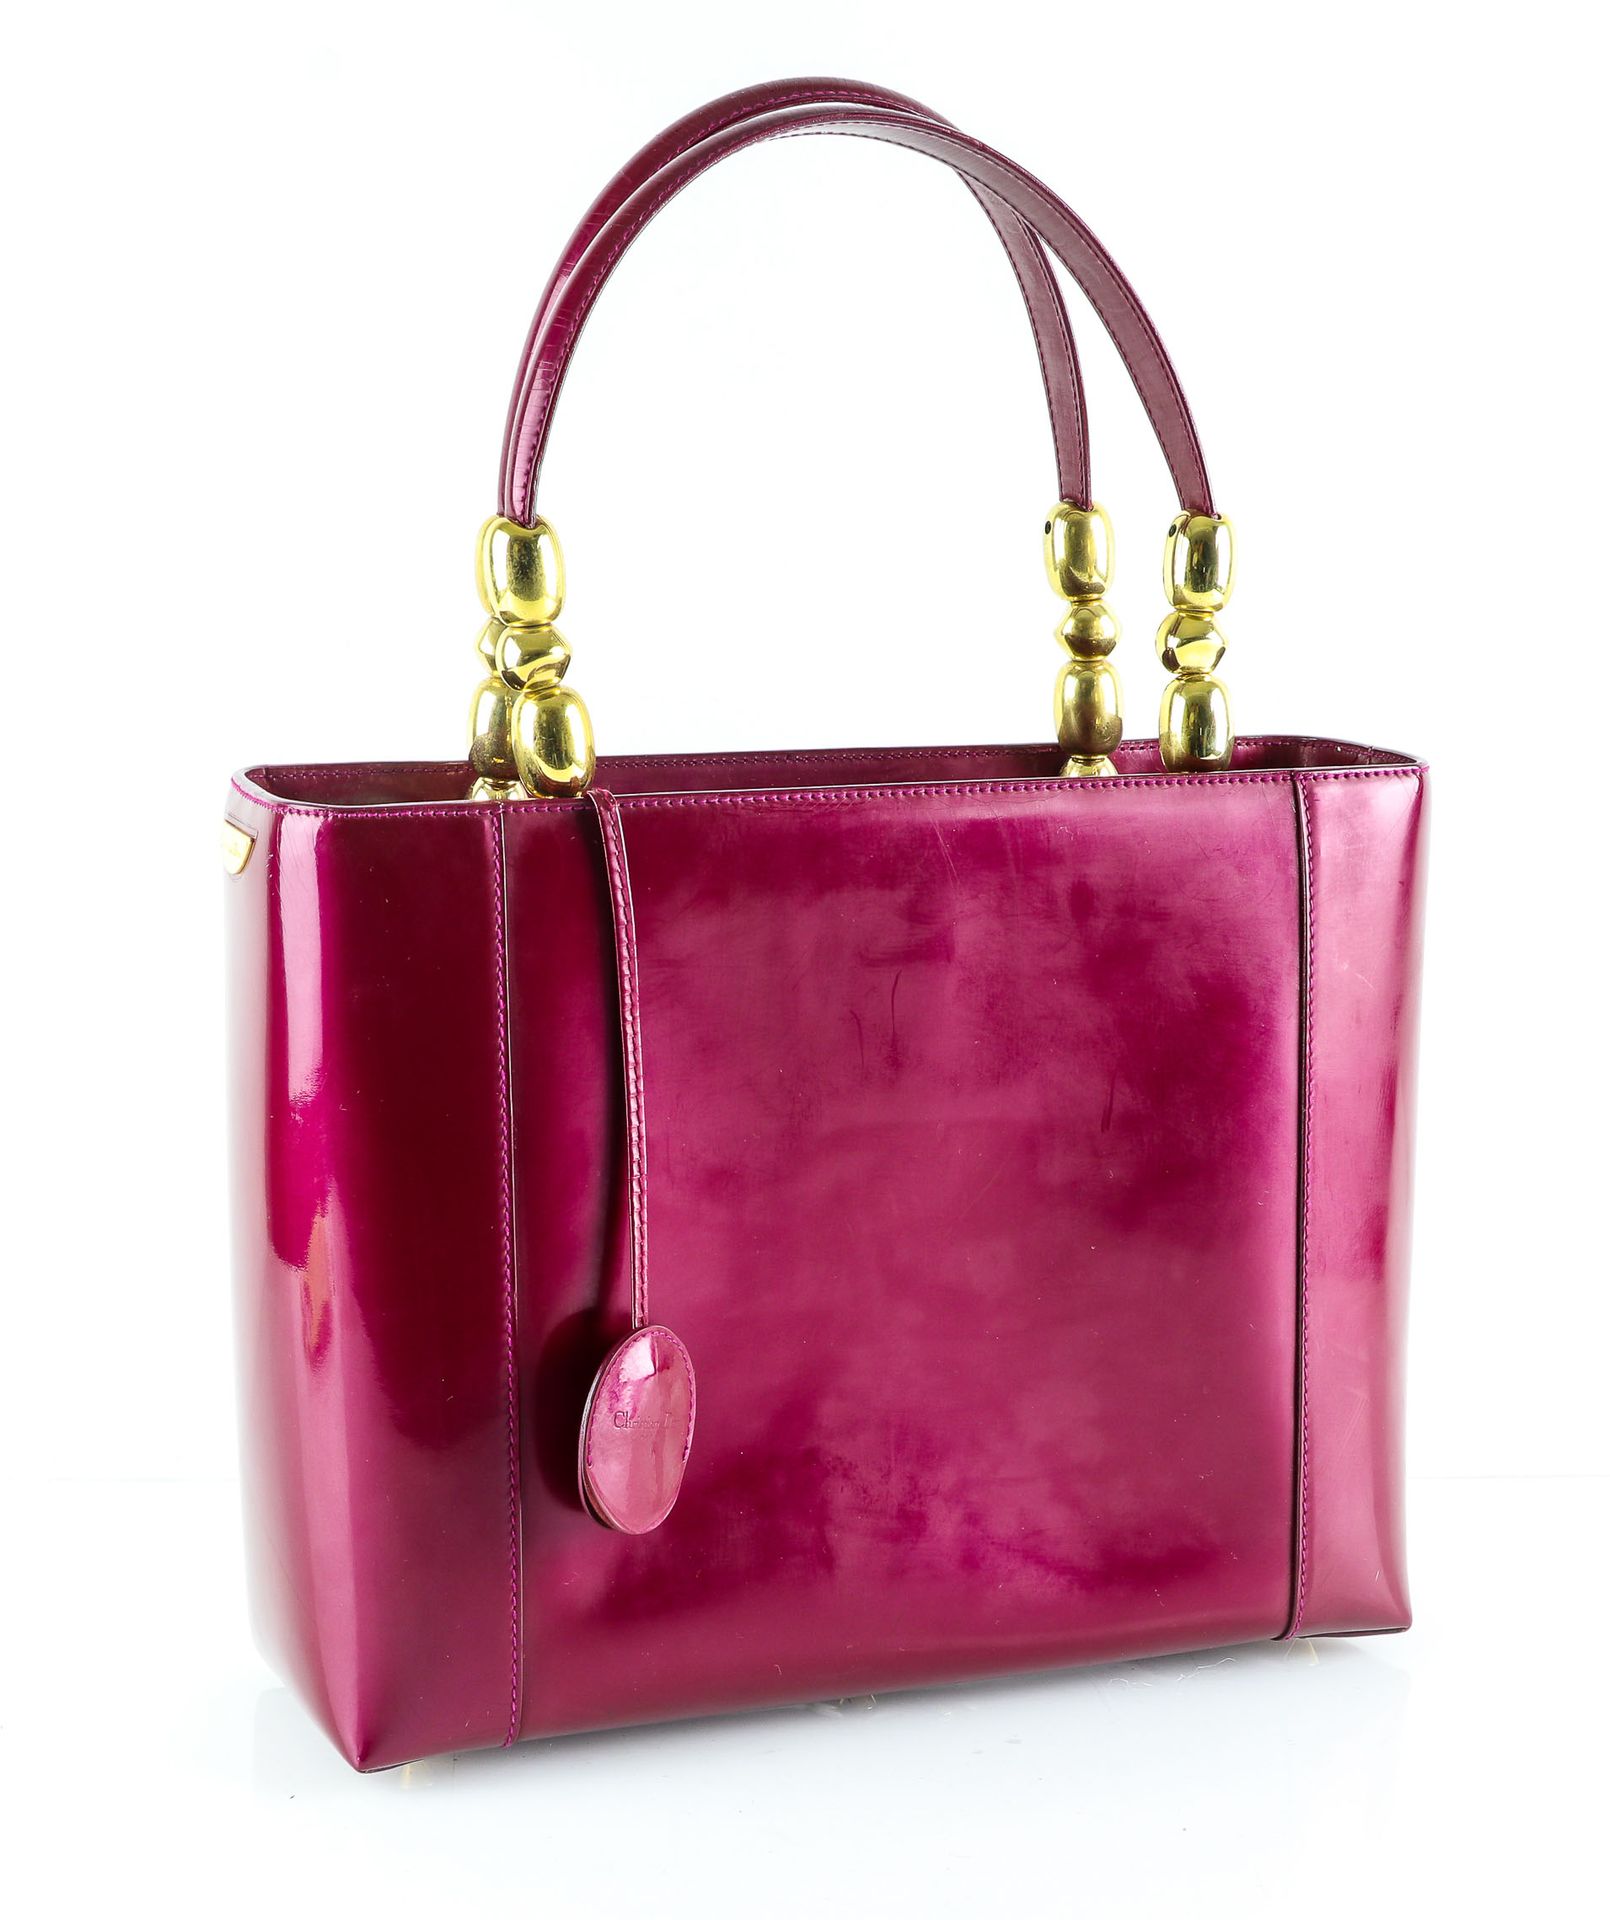 Null Christian DIOR - "Lady Perla" bag in burgundy lacquered leather - Double ha&hellip;